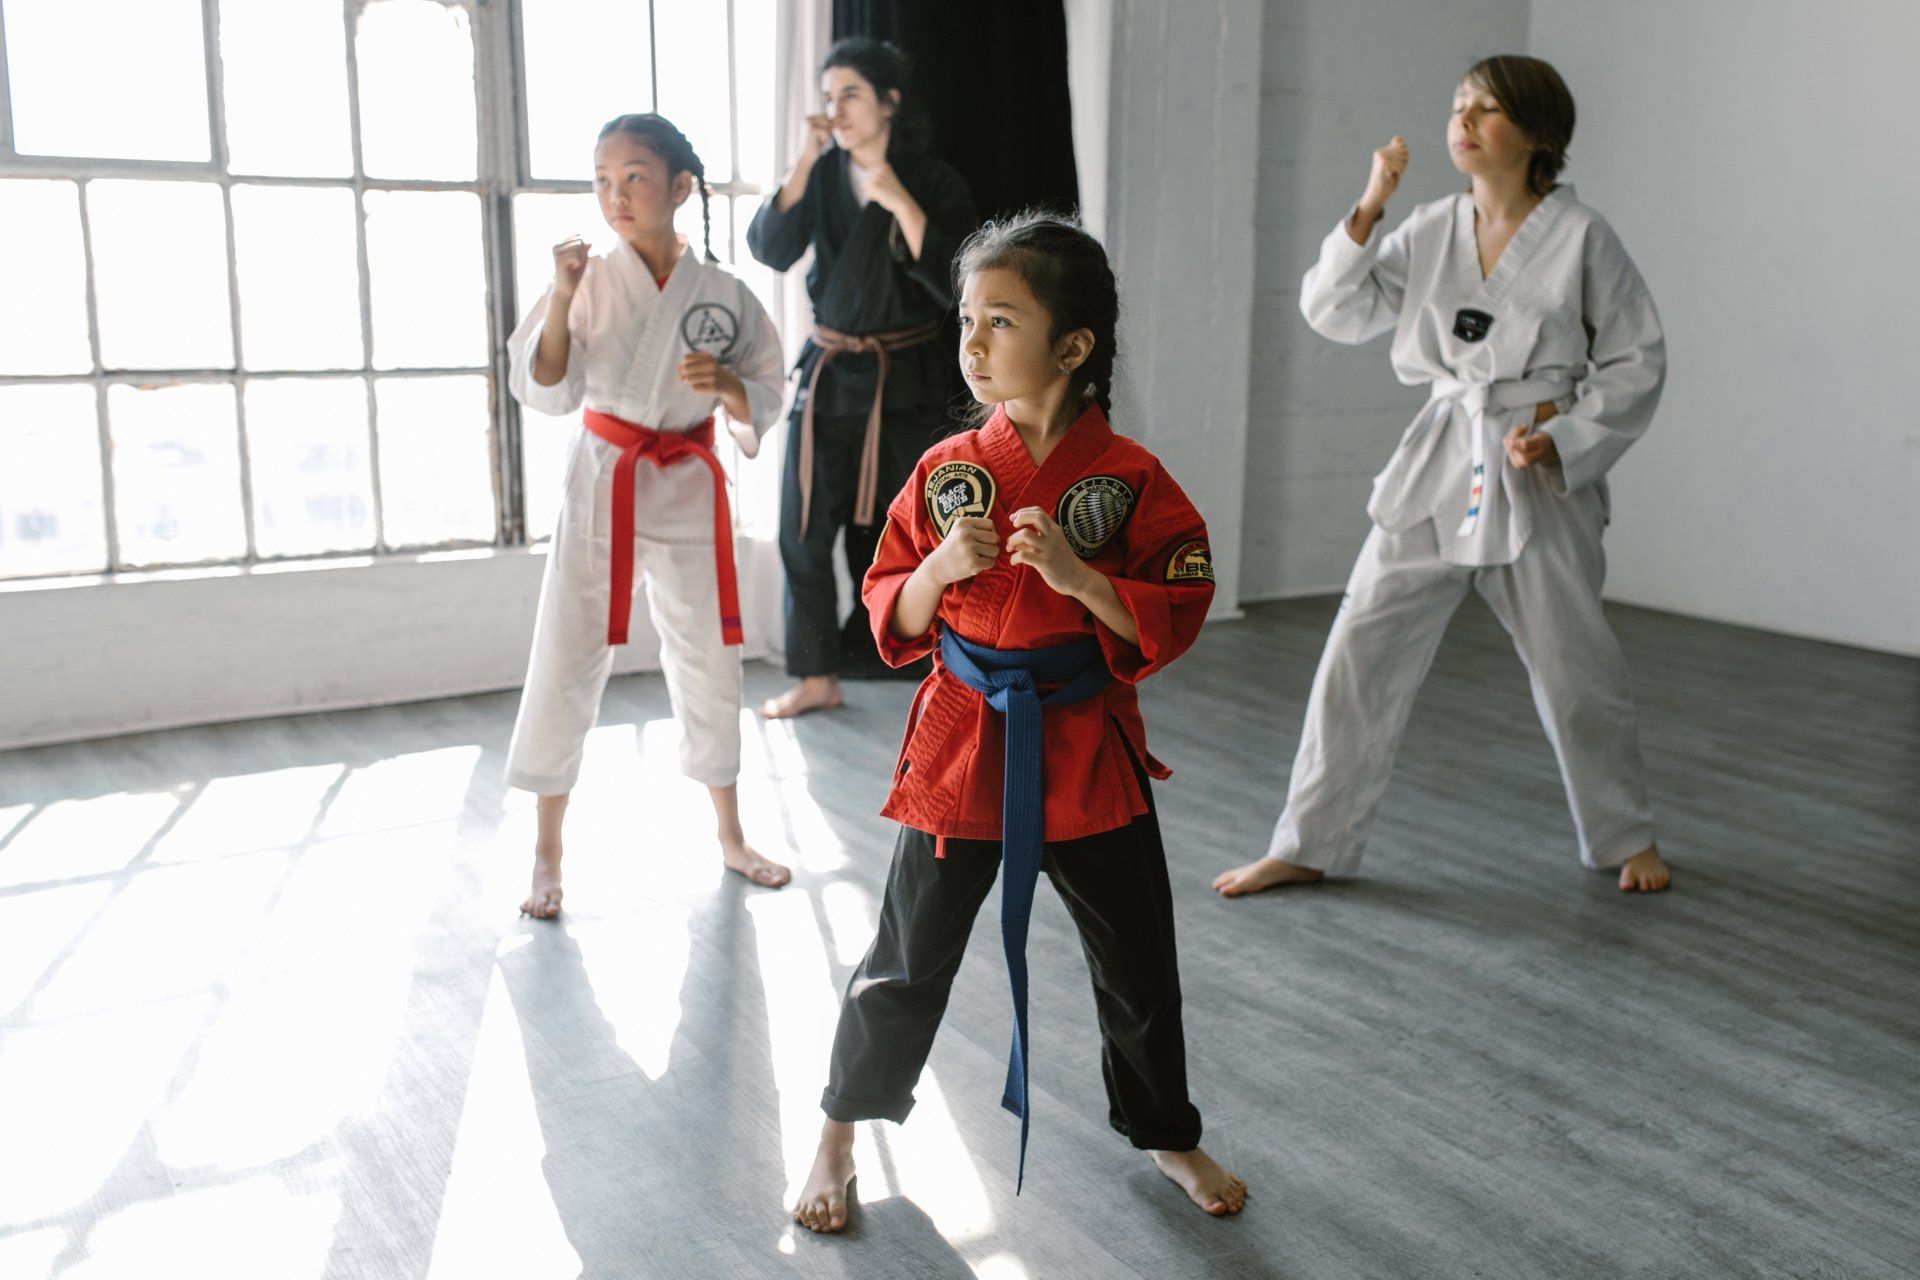 a group of young girls are practicing karate in a gym .